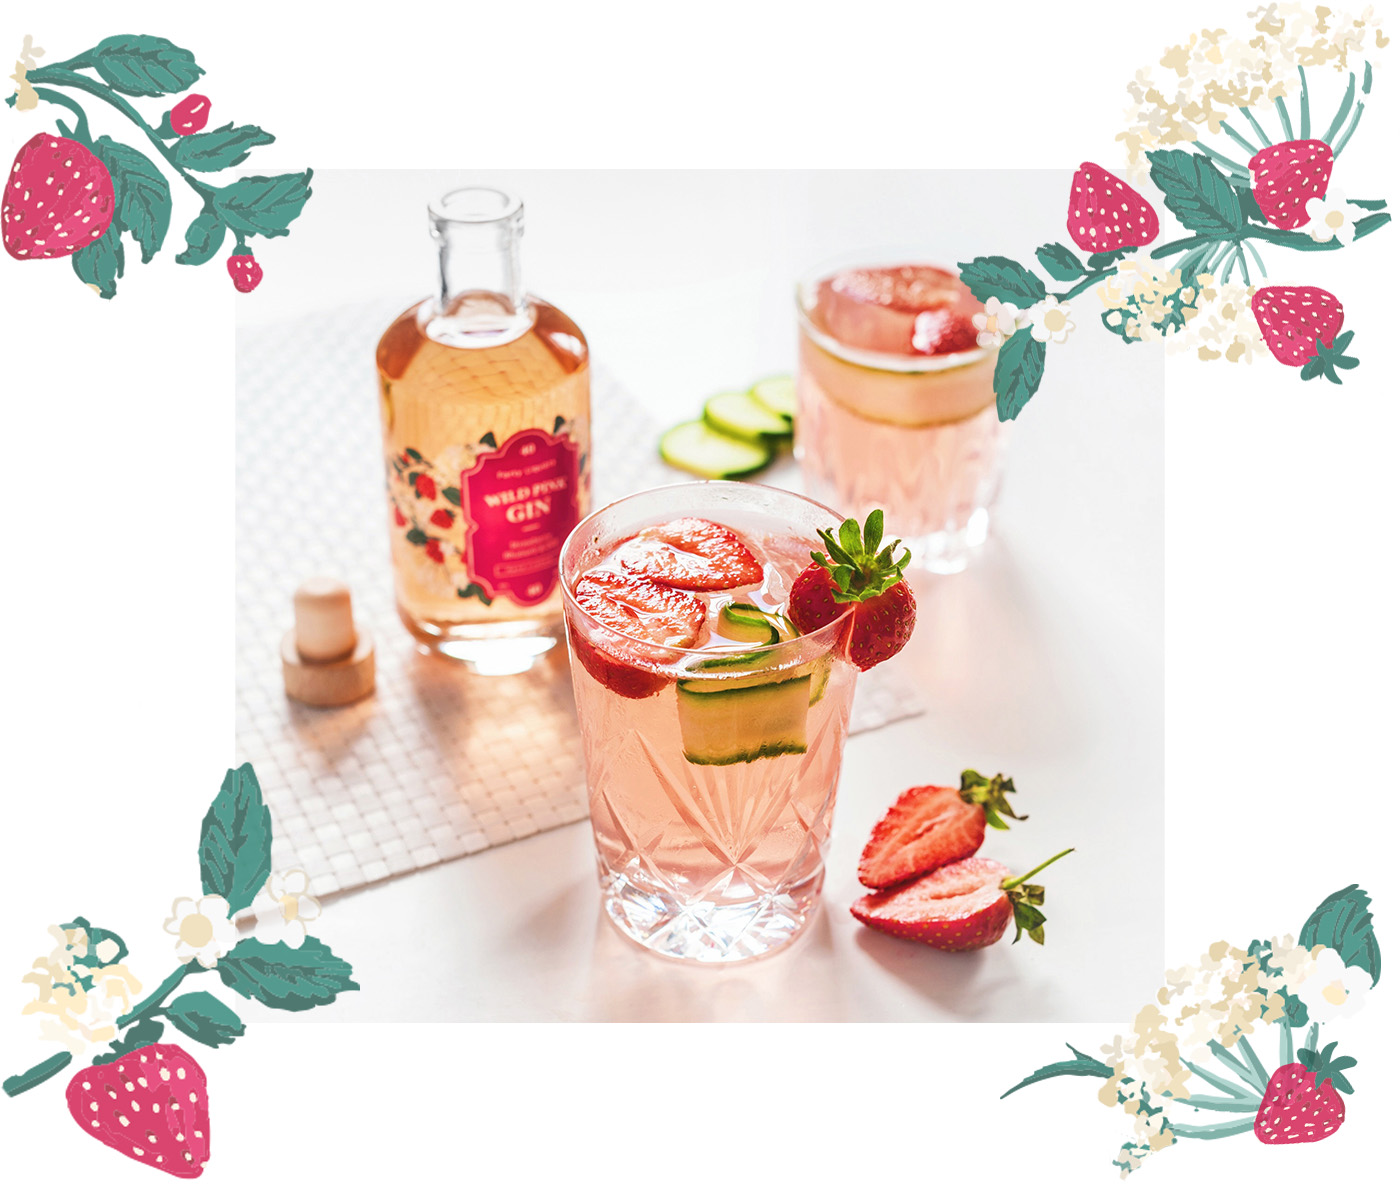 Wild Pin Gin pictured in a glass with fruit and strawberry decoration in pinks